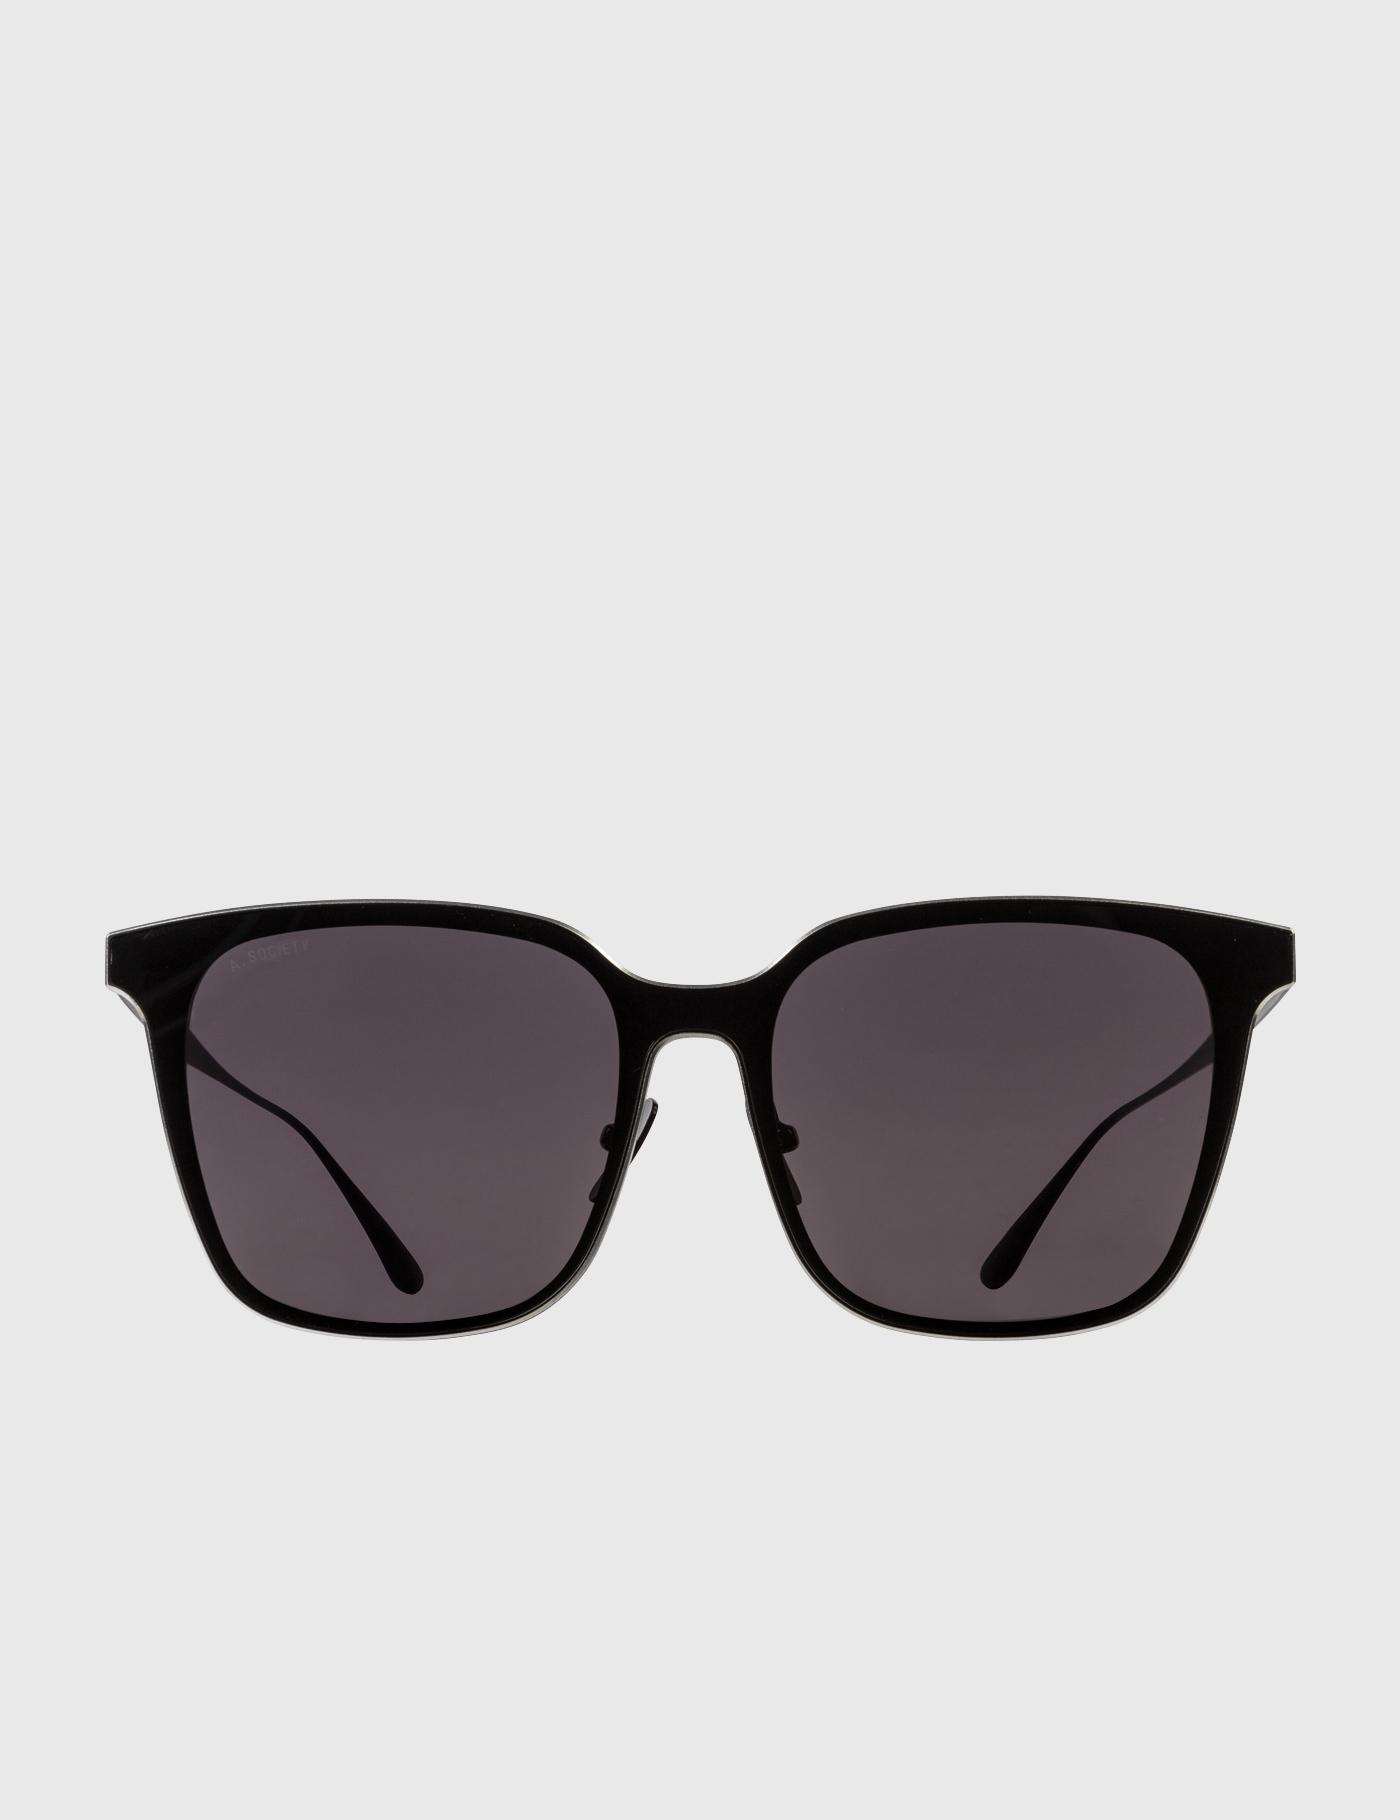 Danne Sunglasses by A.SOCIETY